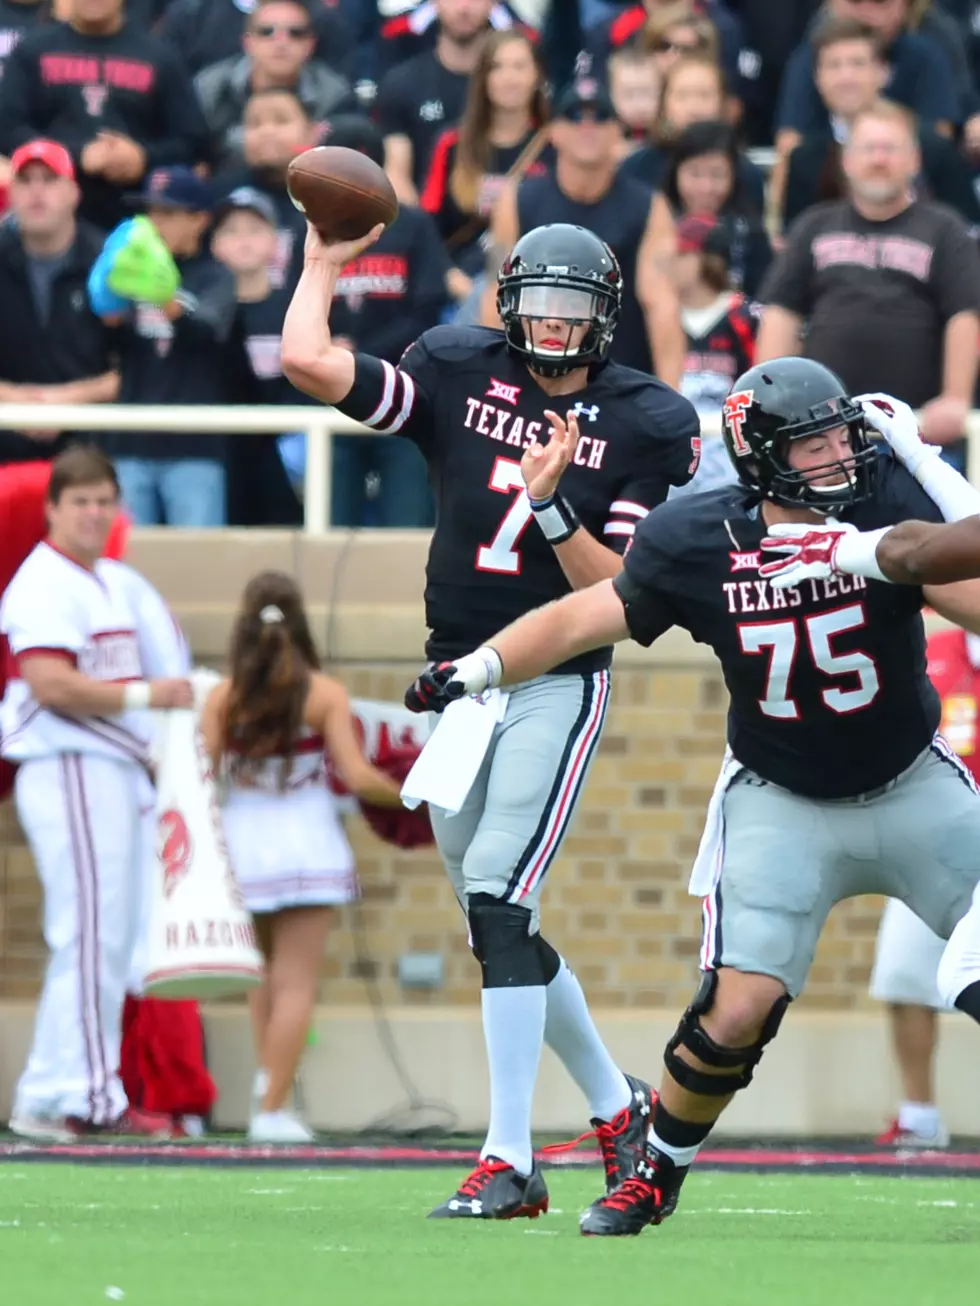 Texas Tech Player Might Follow Mike Jinks To Bowling Green [Update]